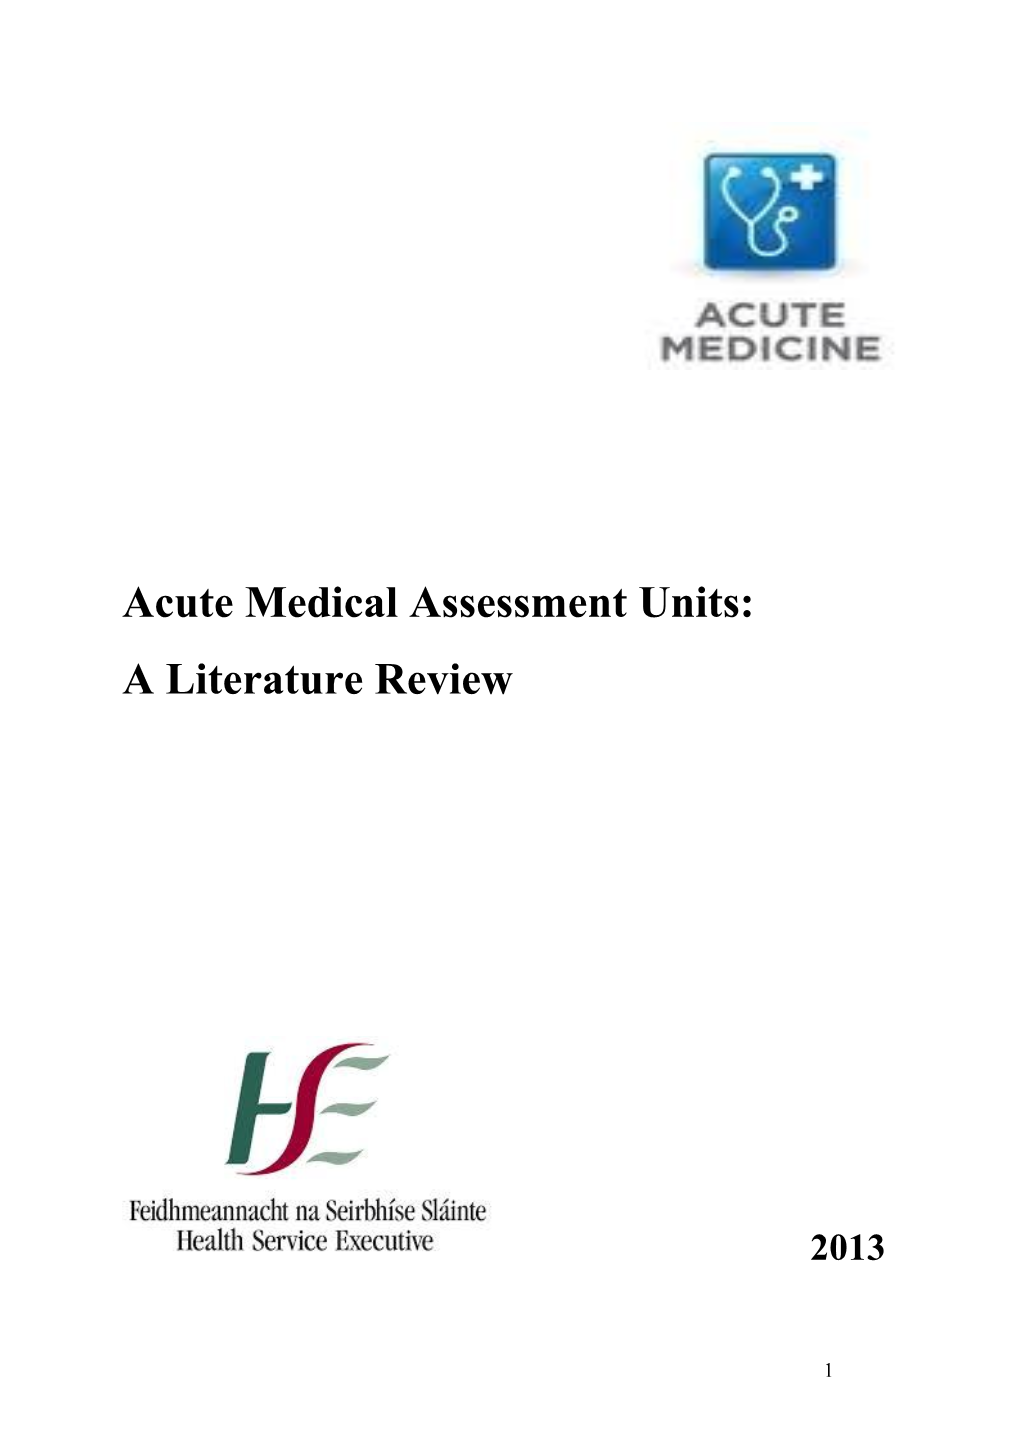 Acute Medical Assessment Units: a Literature Review